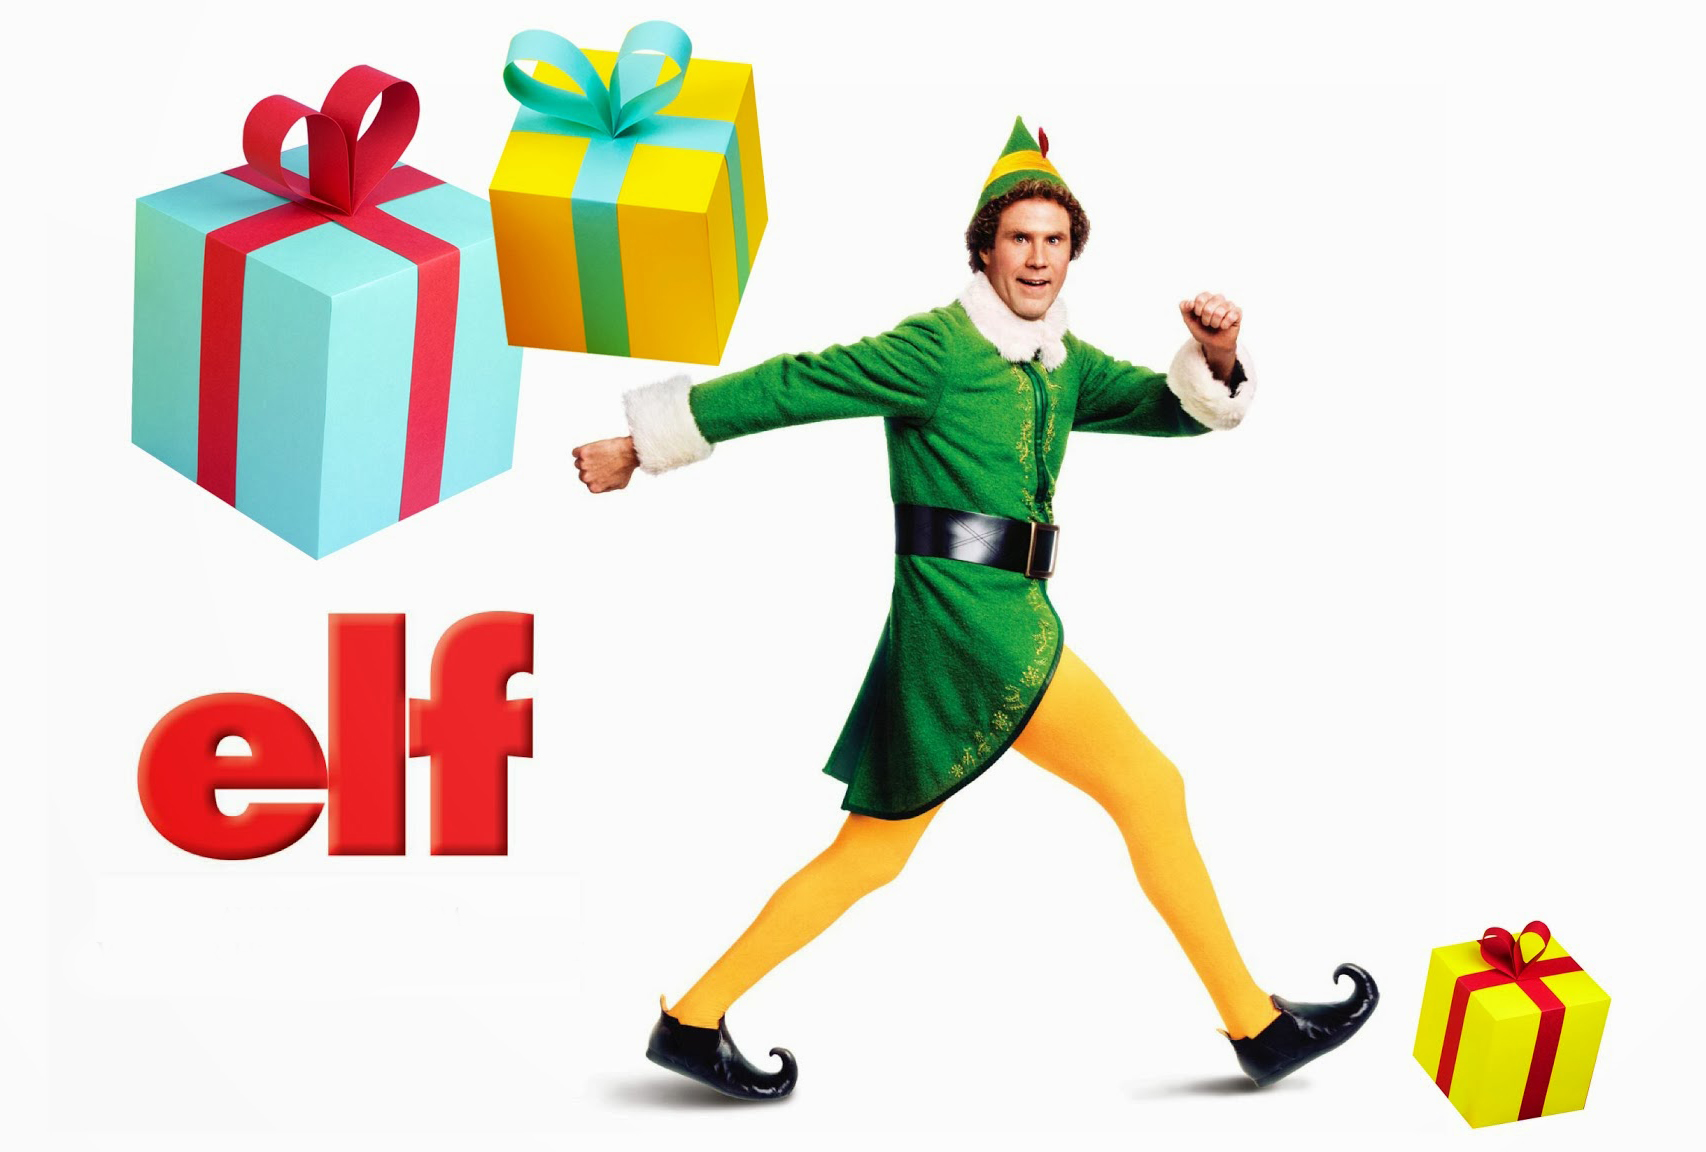 Elf (the movie) poster